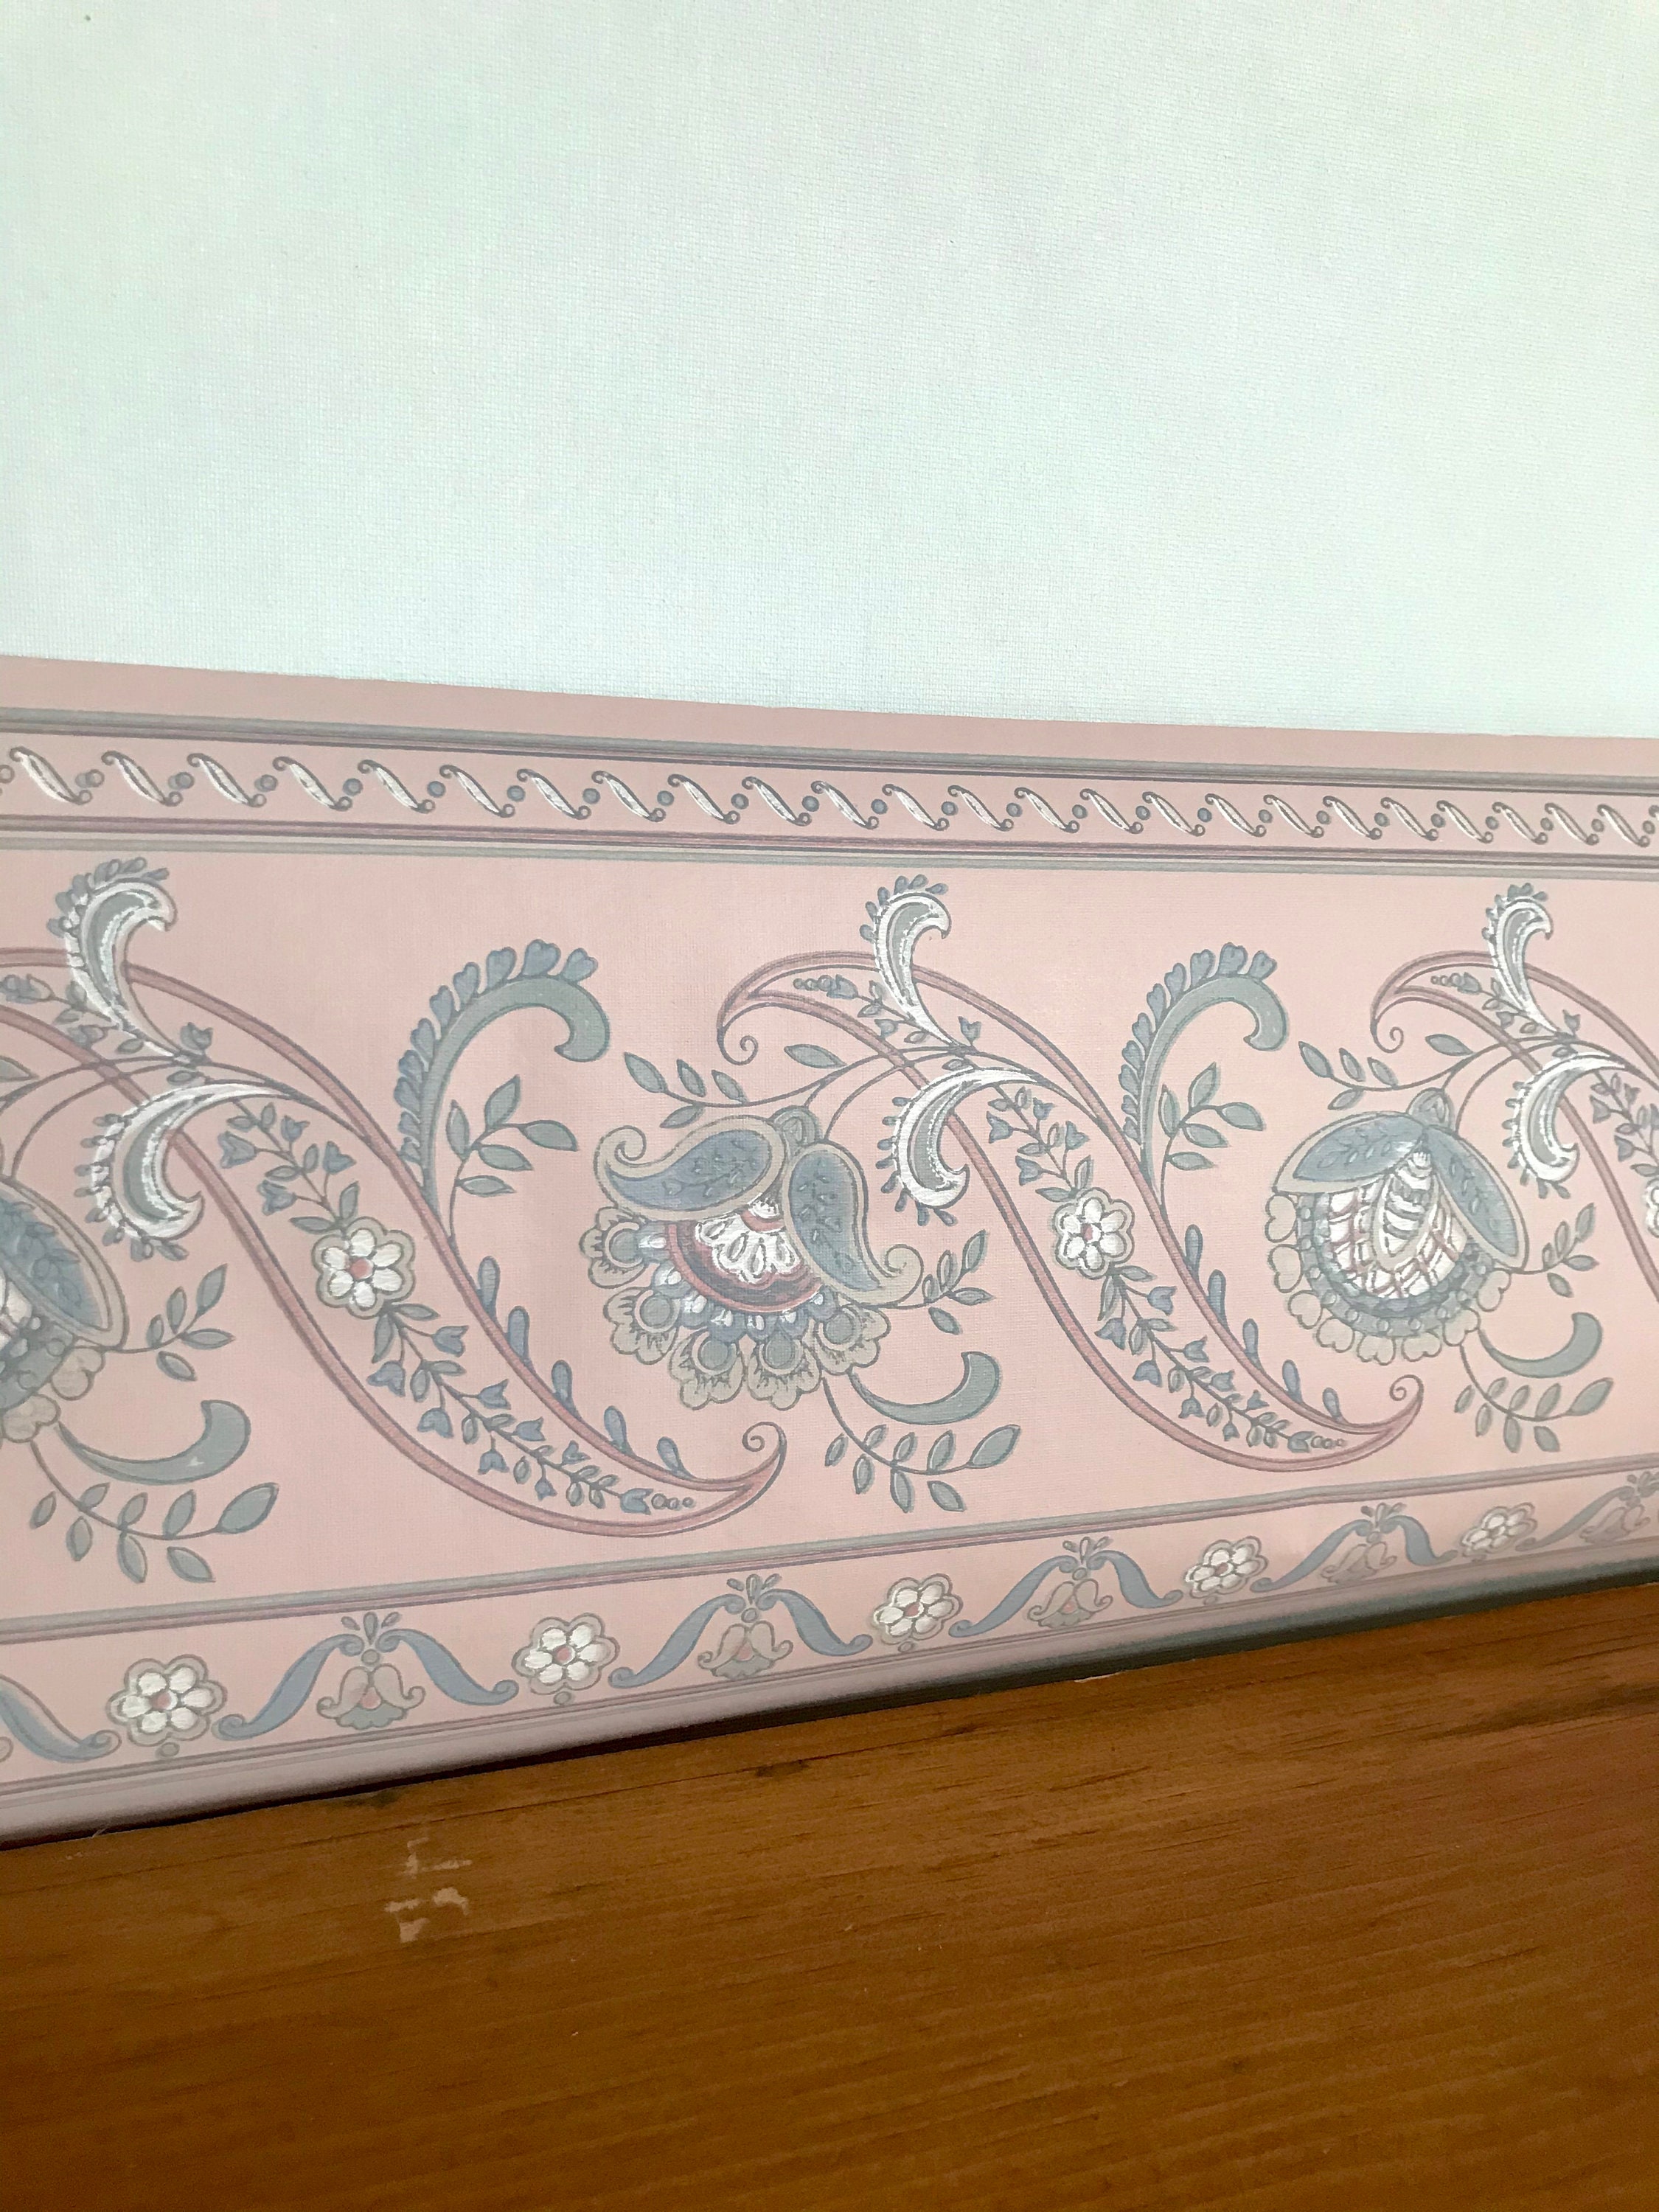 Vintage 80s90s Paisley Prepasted Wallpaper Border 80s90s | Etsy